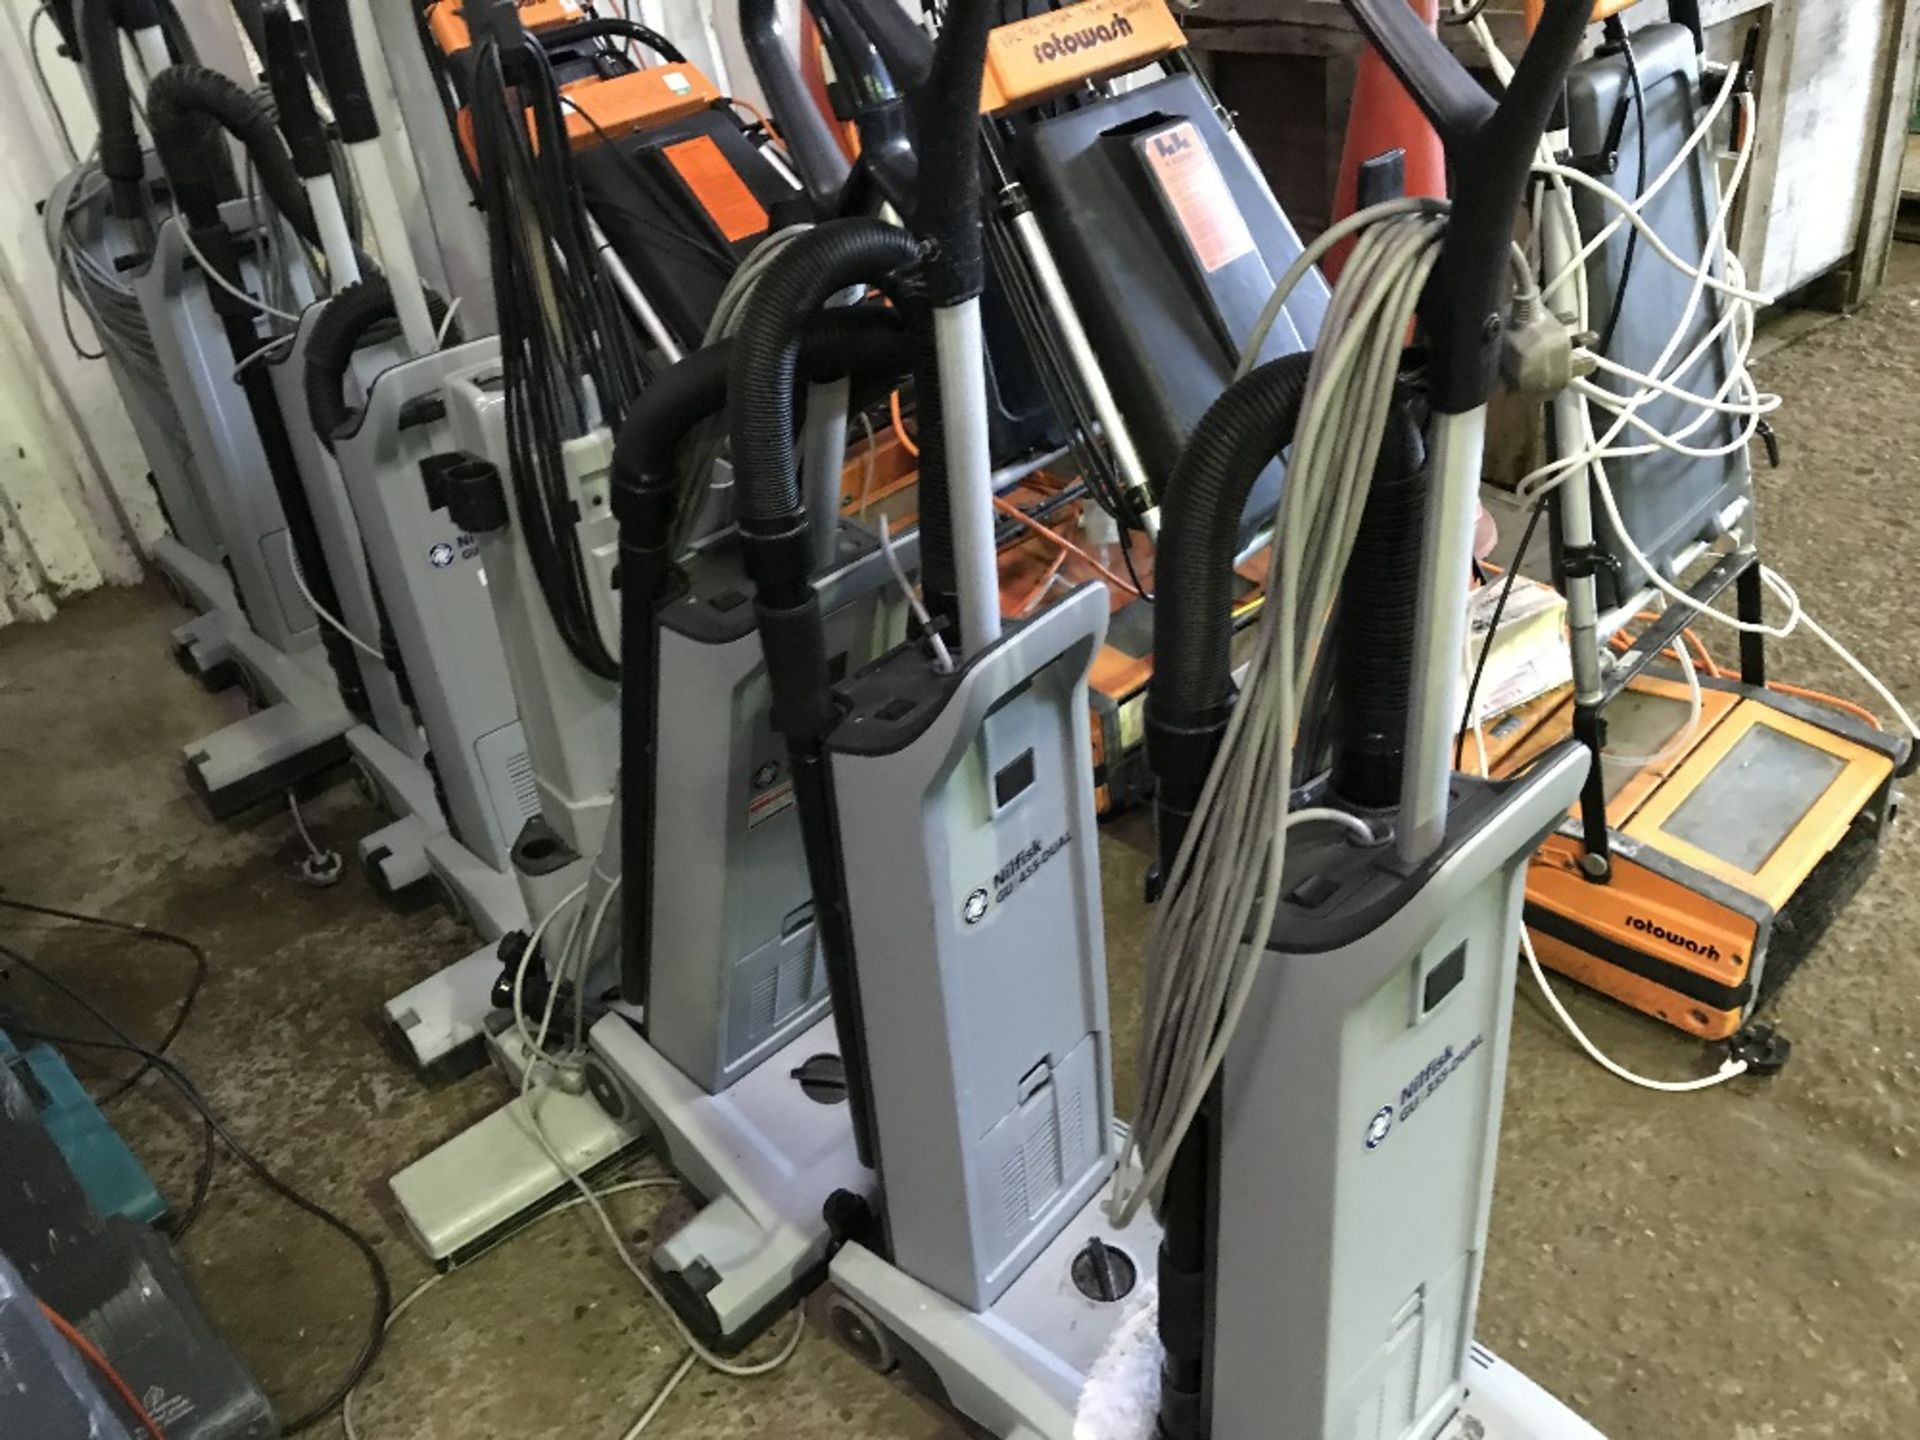 8 X NILFISK VACUUM CLEANERS...SOURCED FROM LARGE CONTRACT CLEANING COMPANY.....THIS ITEM MAY BE